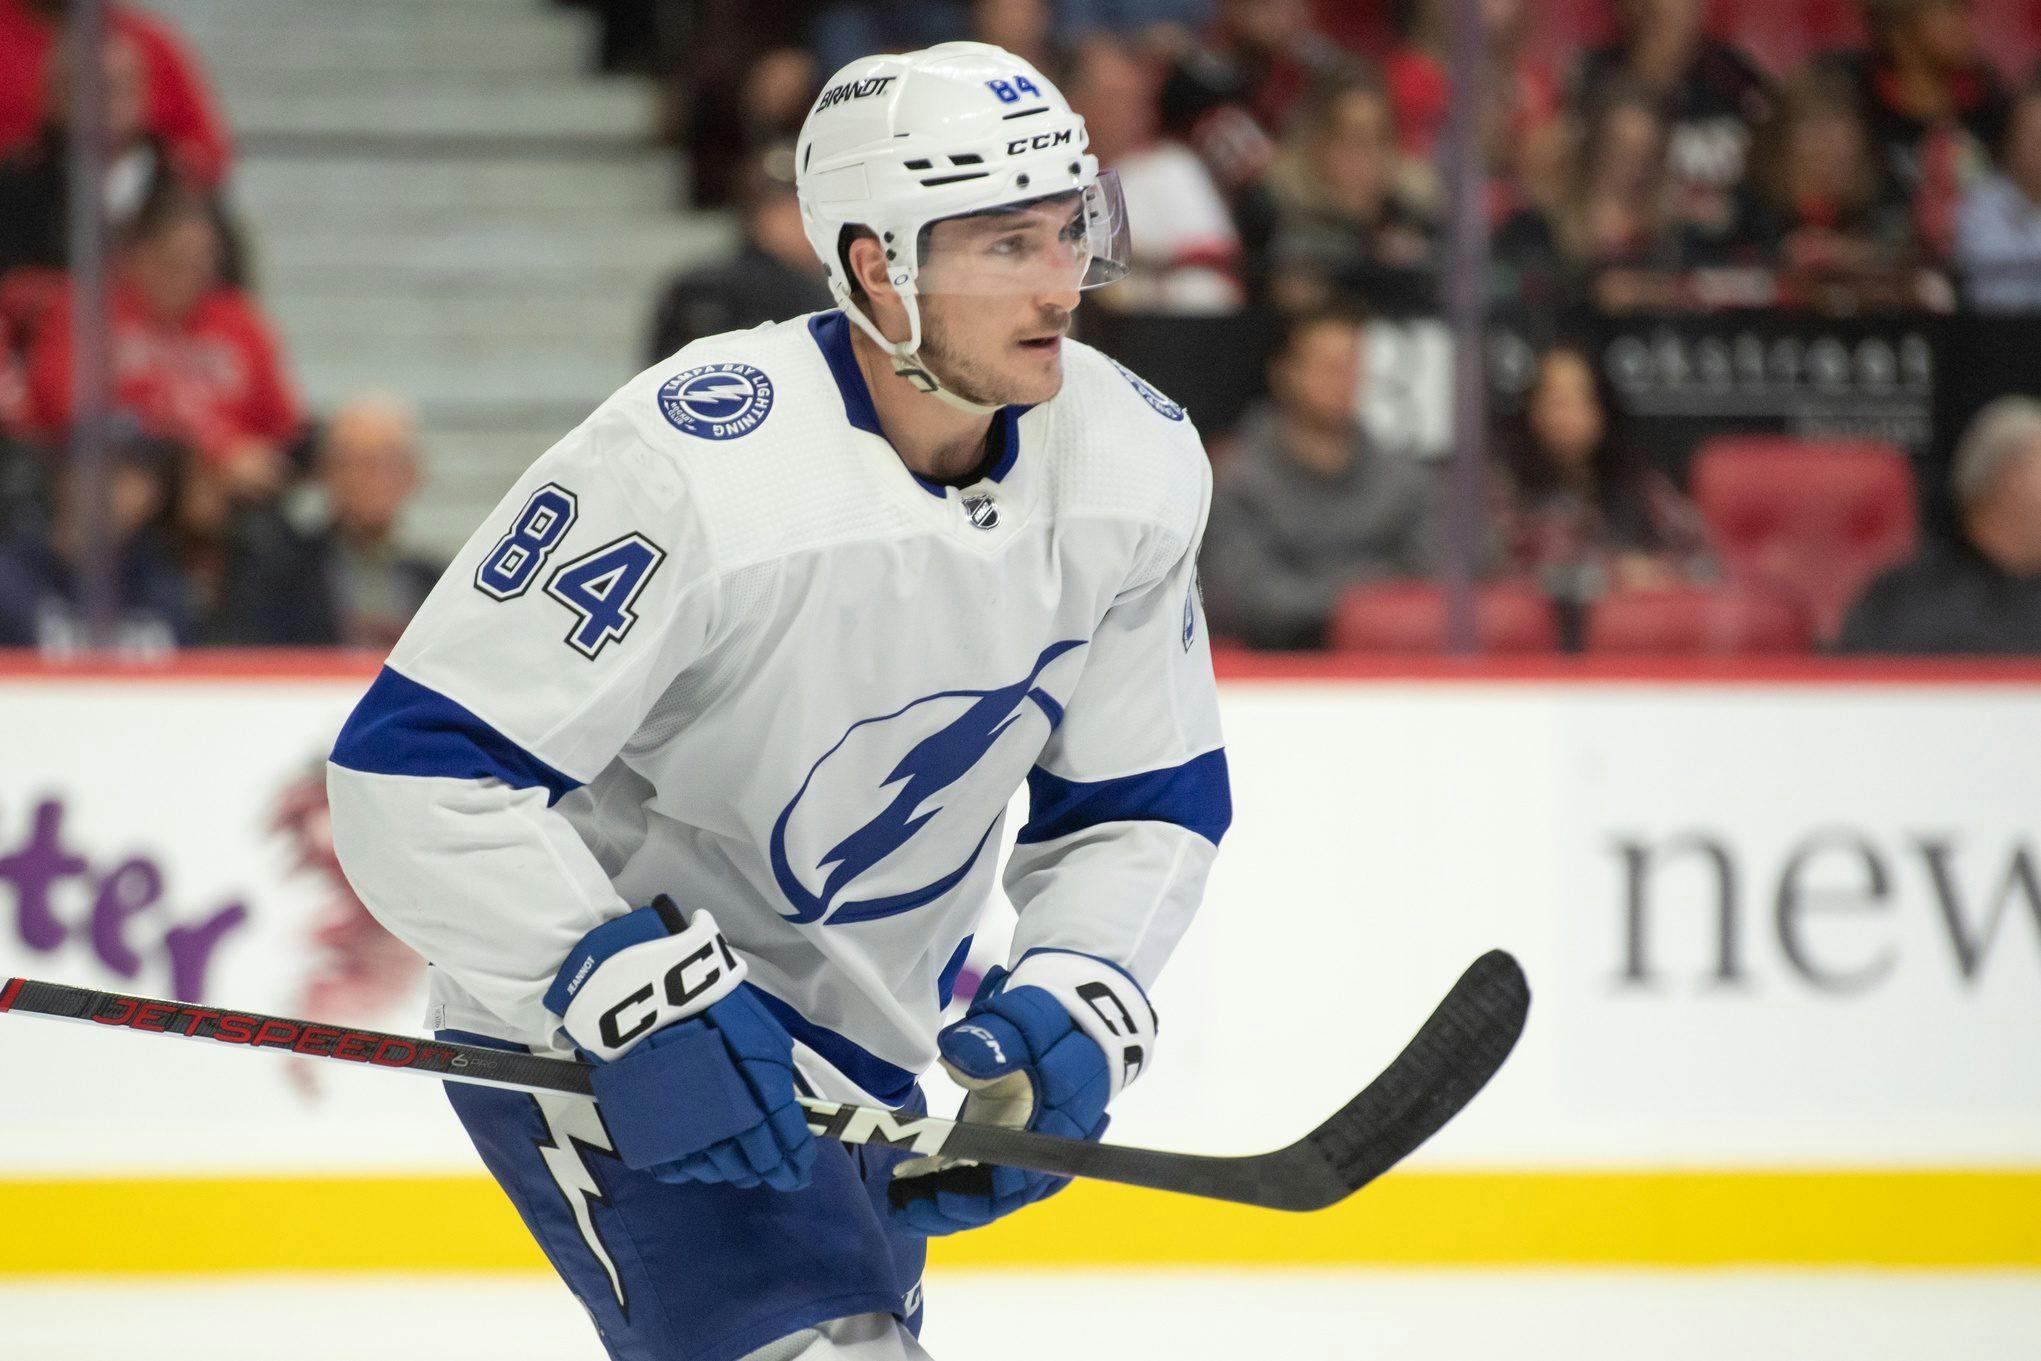 Lightning’s Tanner Jeannot will miss Thursday’s game vs. Canadiens, listed as day-to-day